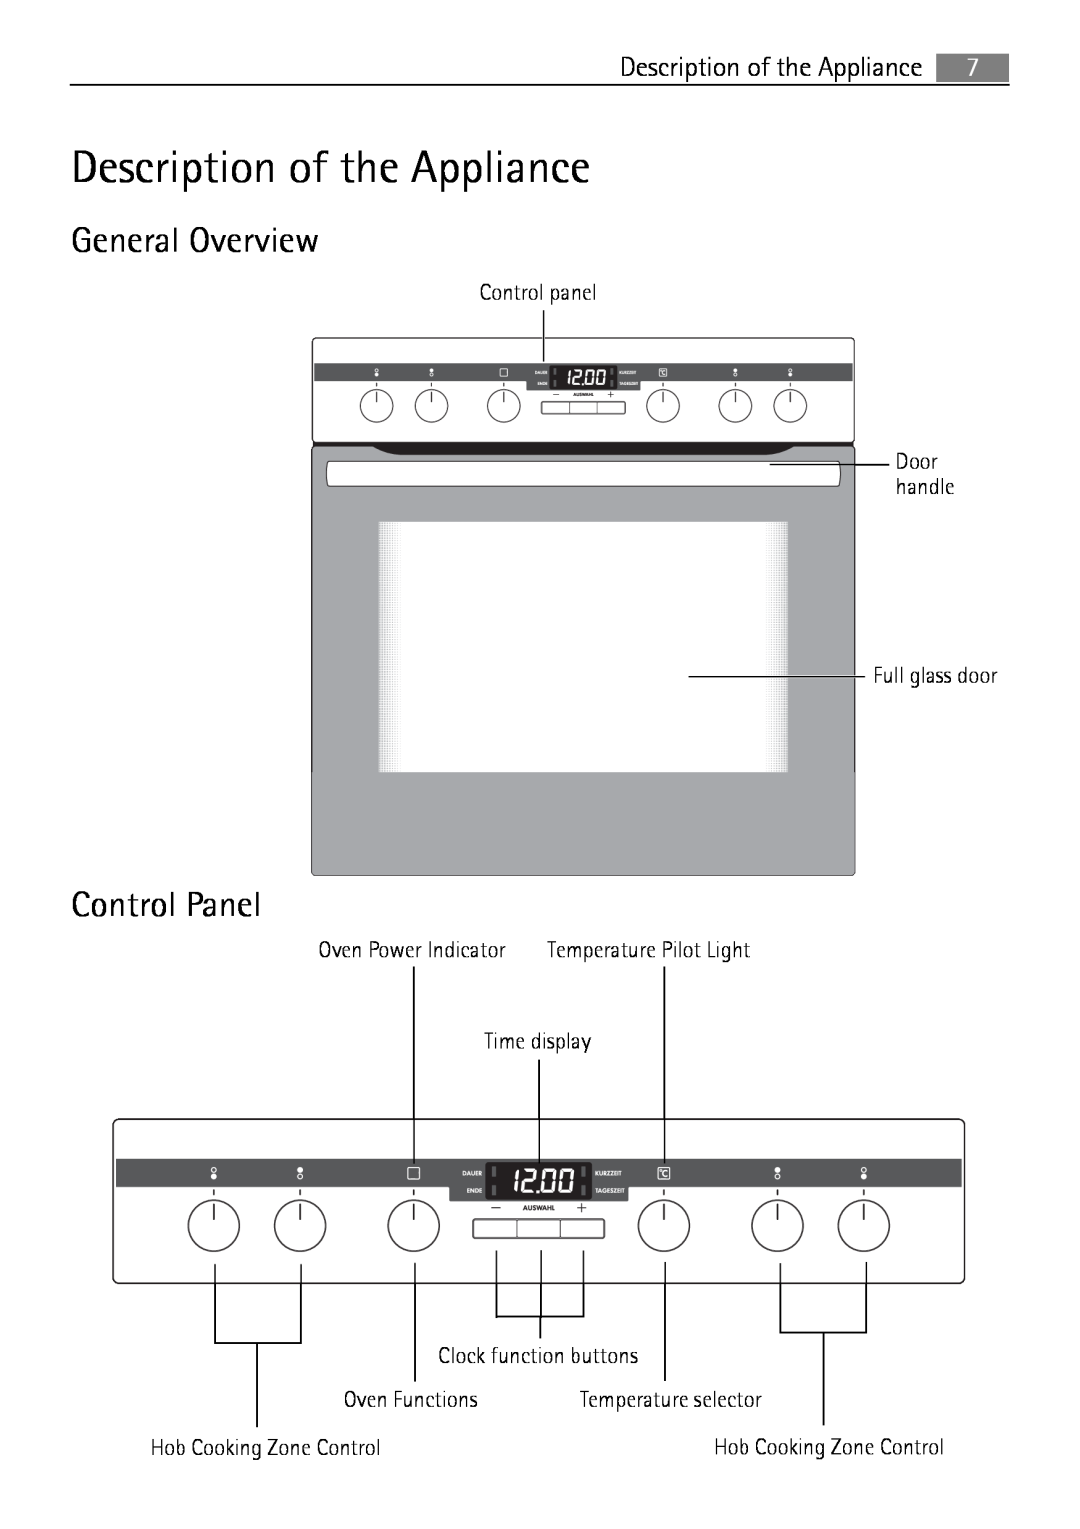 Electrolux E43012-5 user manual Description of the Appliance, General Overview, Control Panel 